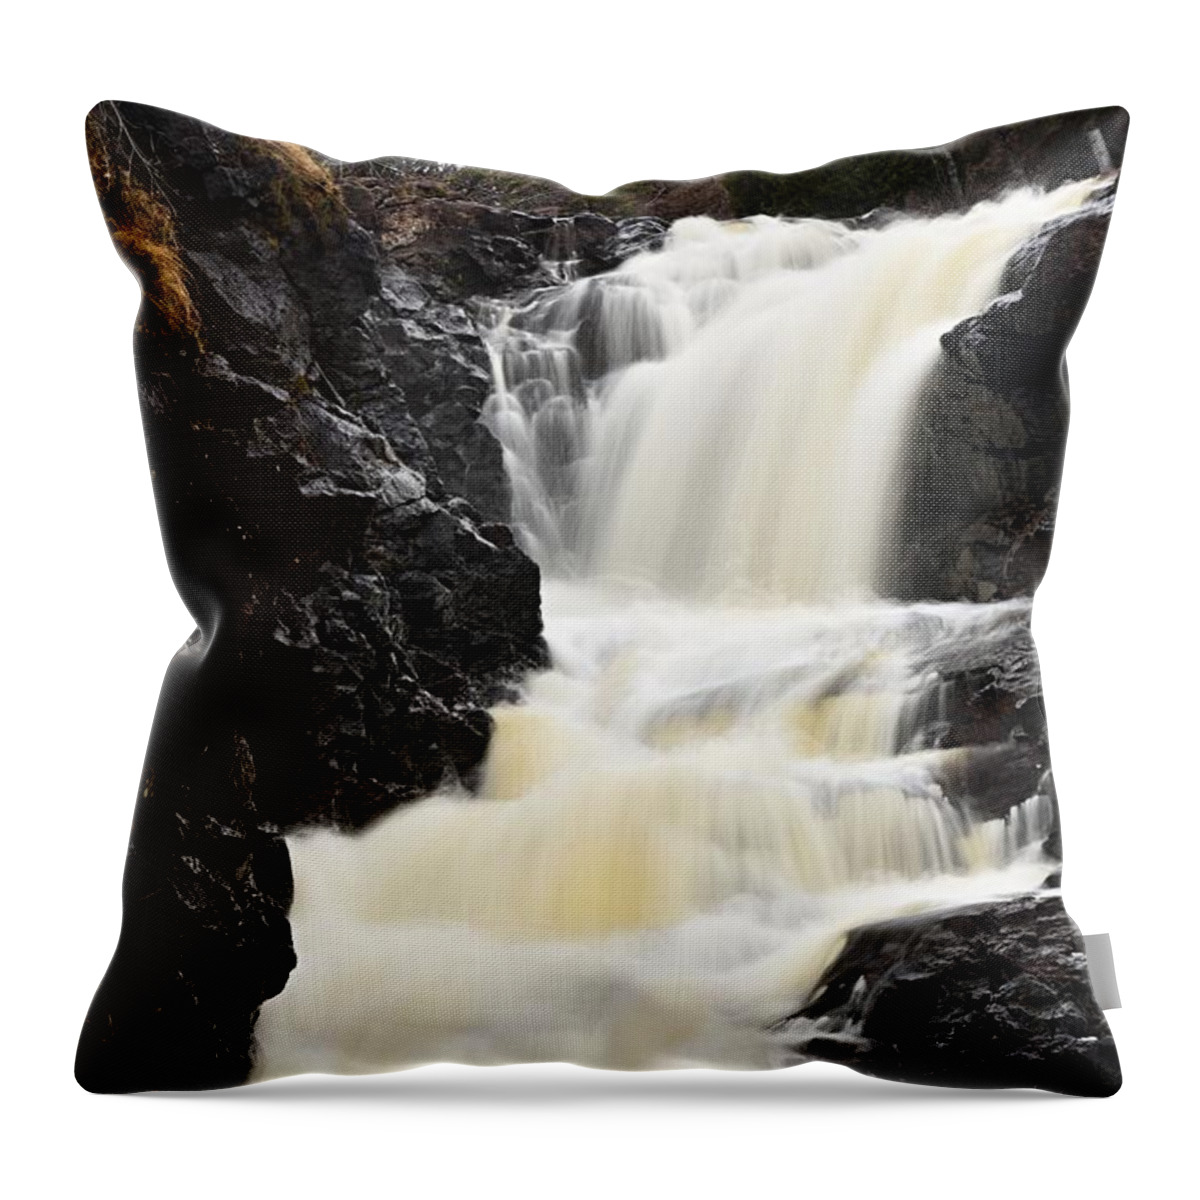 Photography Throw Pillow featuring the photograph Two Island River Waterfall by Larry Ricker